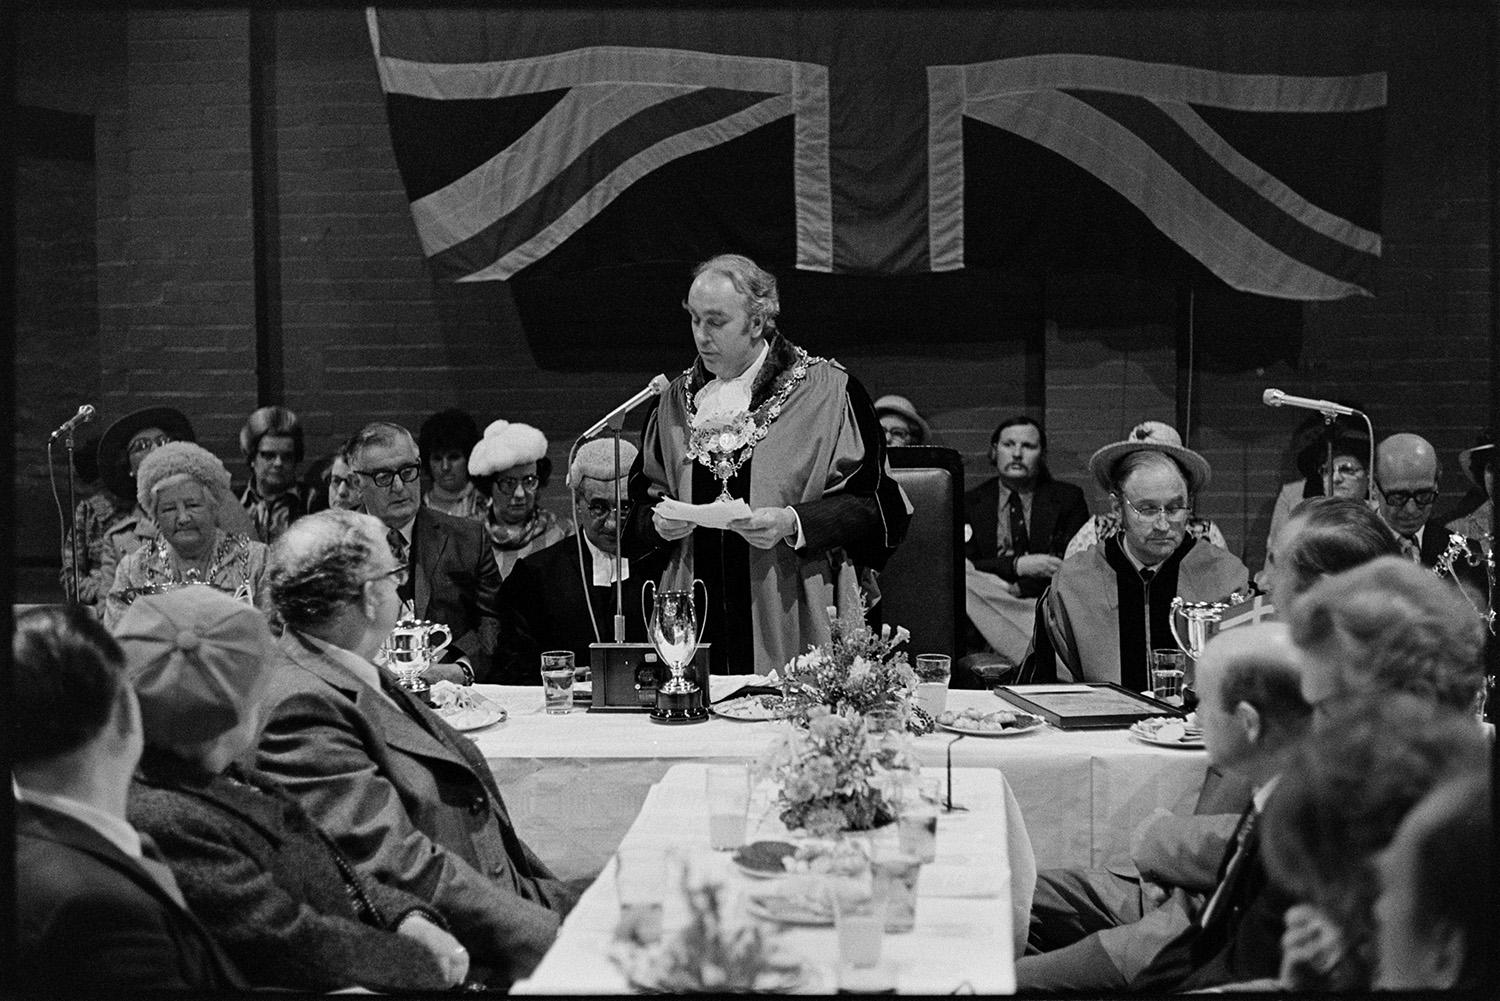 Mayors and dignitaries, Mayfair Banquet. Speeches, presentations and toasts to French twin town. 
[Dr Cramp, the mayor, making a speech at the Torrington Mayfair Banquet at The Plough, Torrington. Other dignitaries are sat behind him and a Union Jack flag is hung up in the background.]